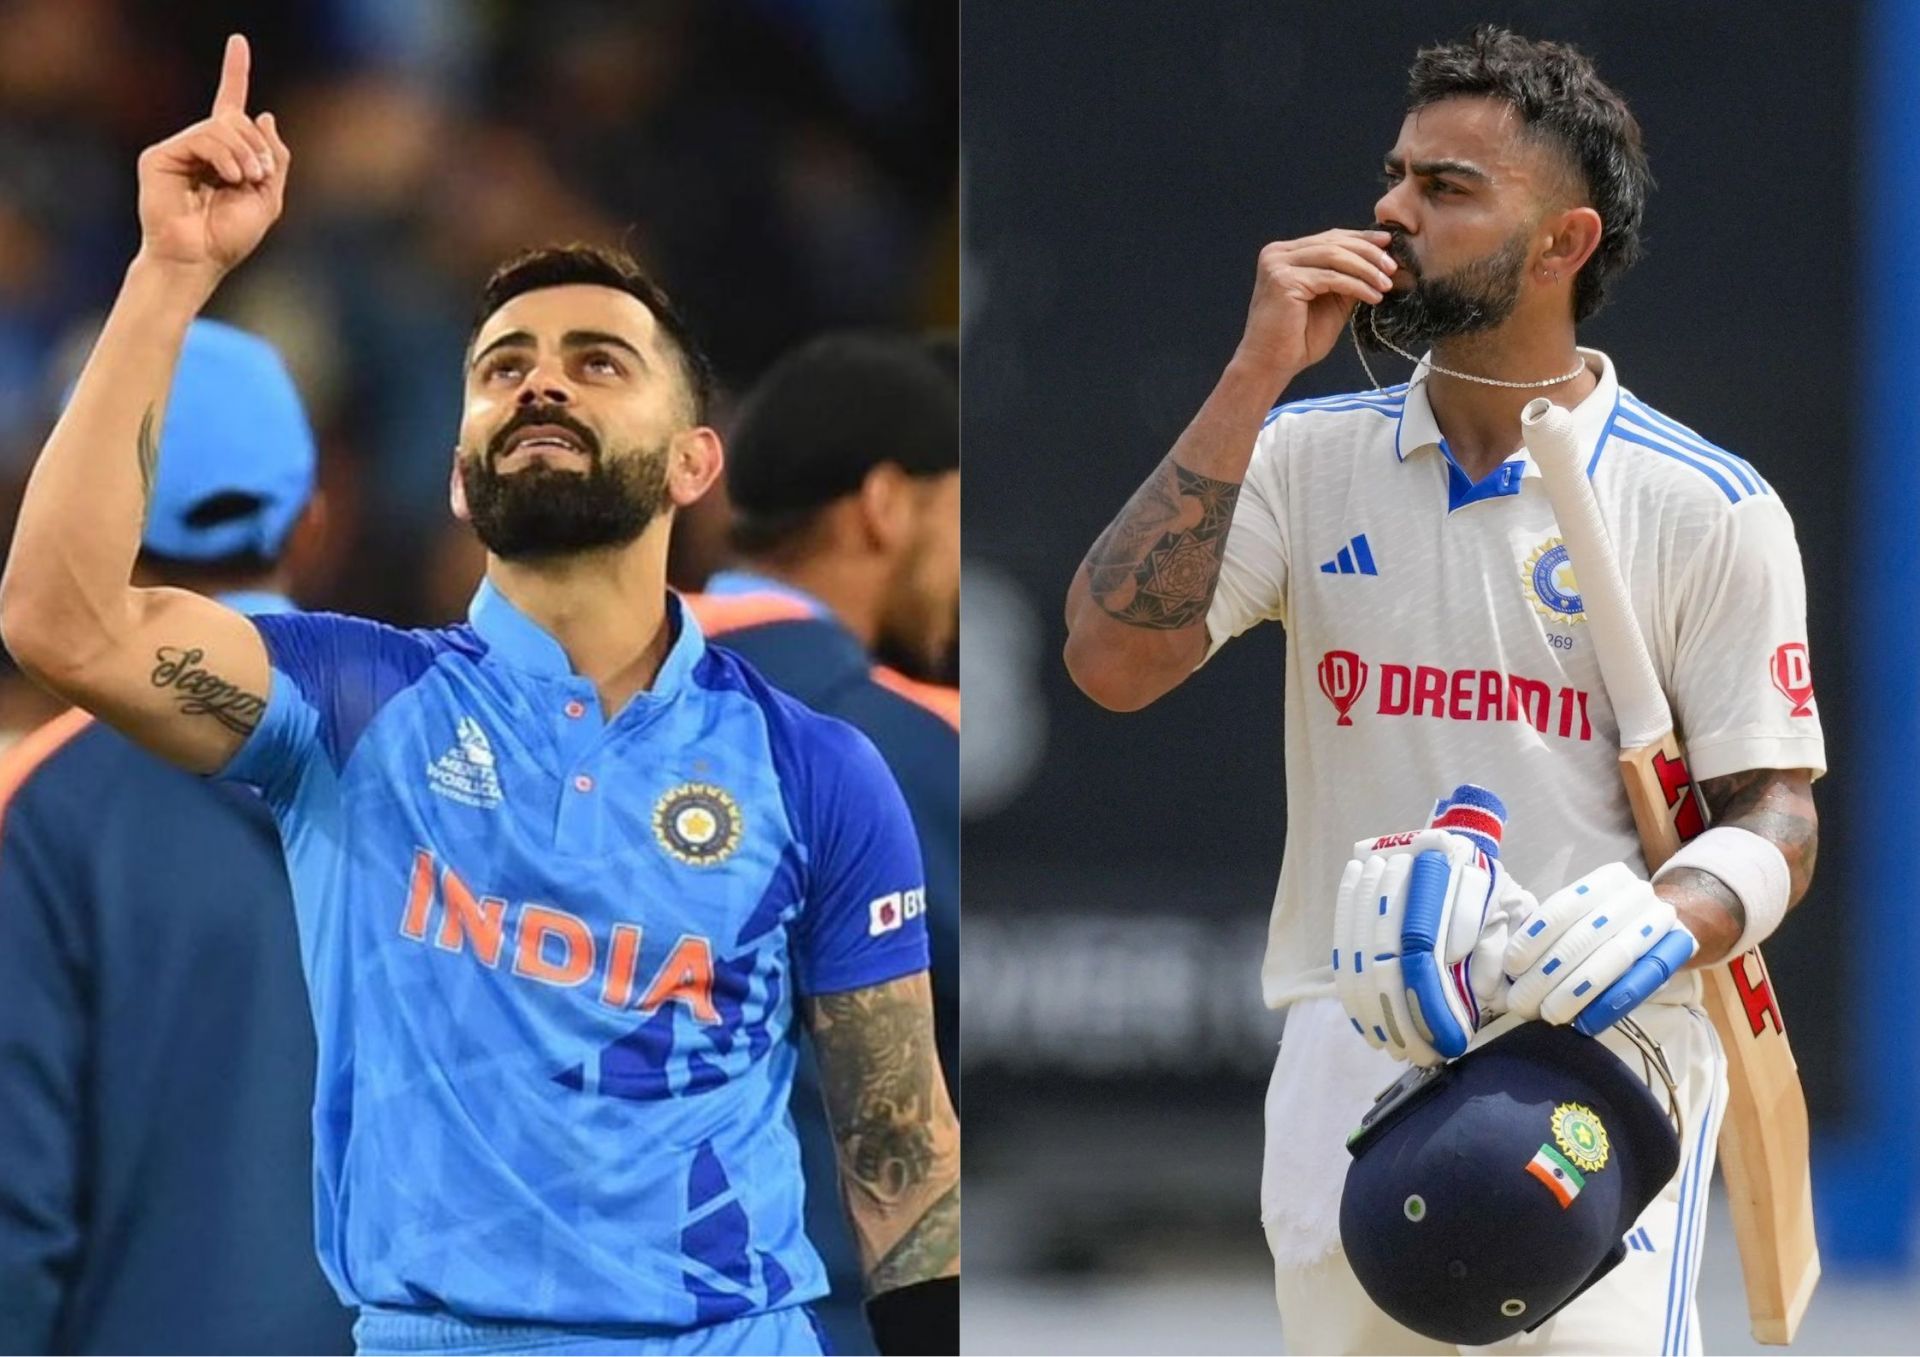 Virat Kohli joins an elite list of players to have completed 15 years as an international cricketer (Picture Credits: Twitter/Virat Kohli; AP).